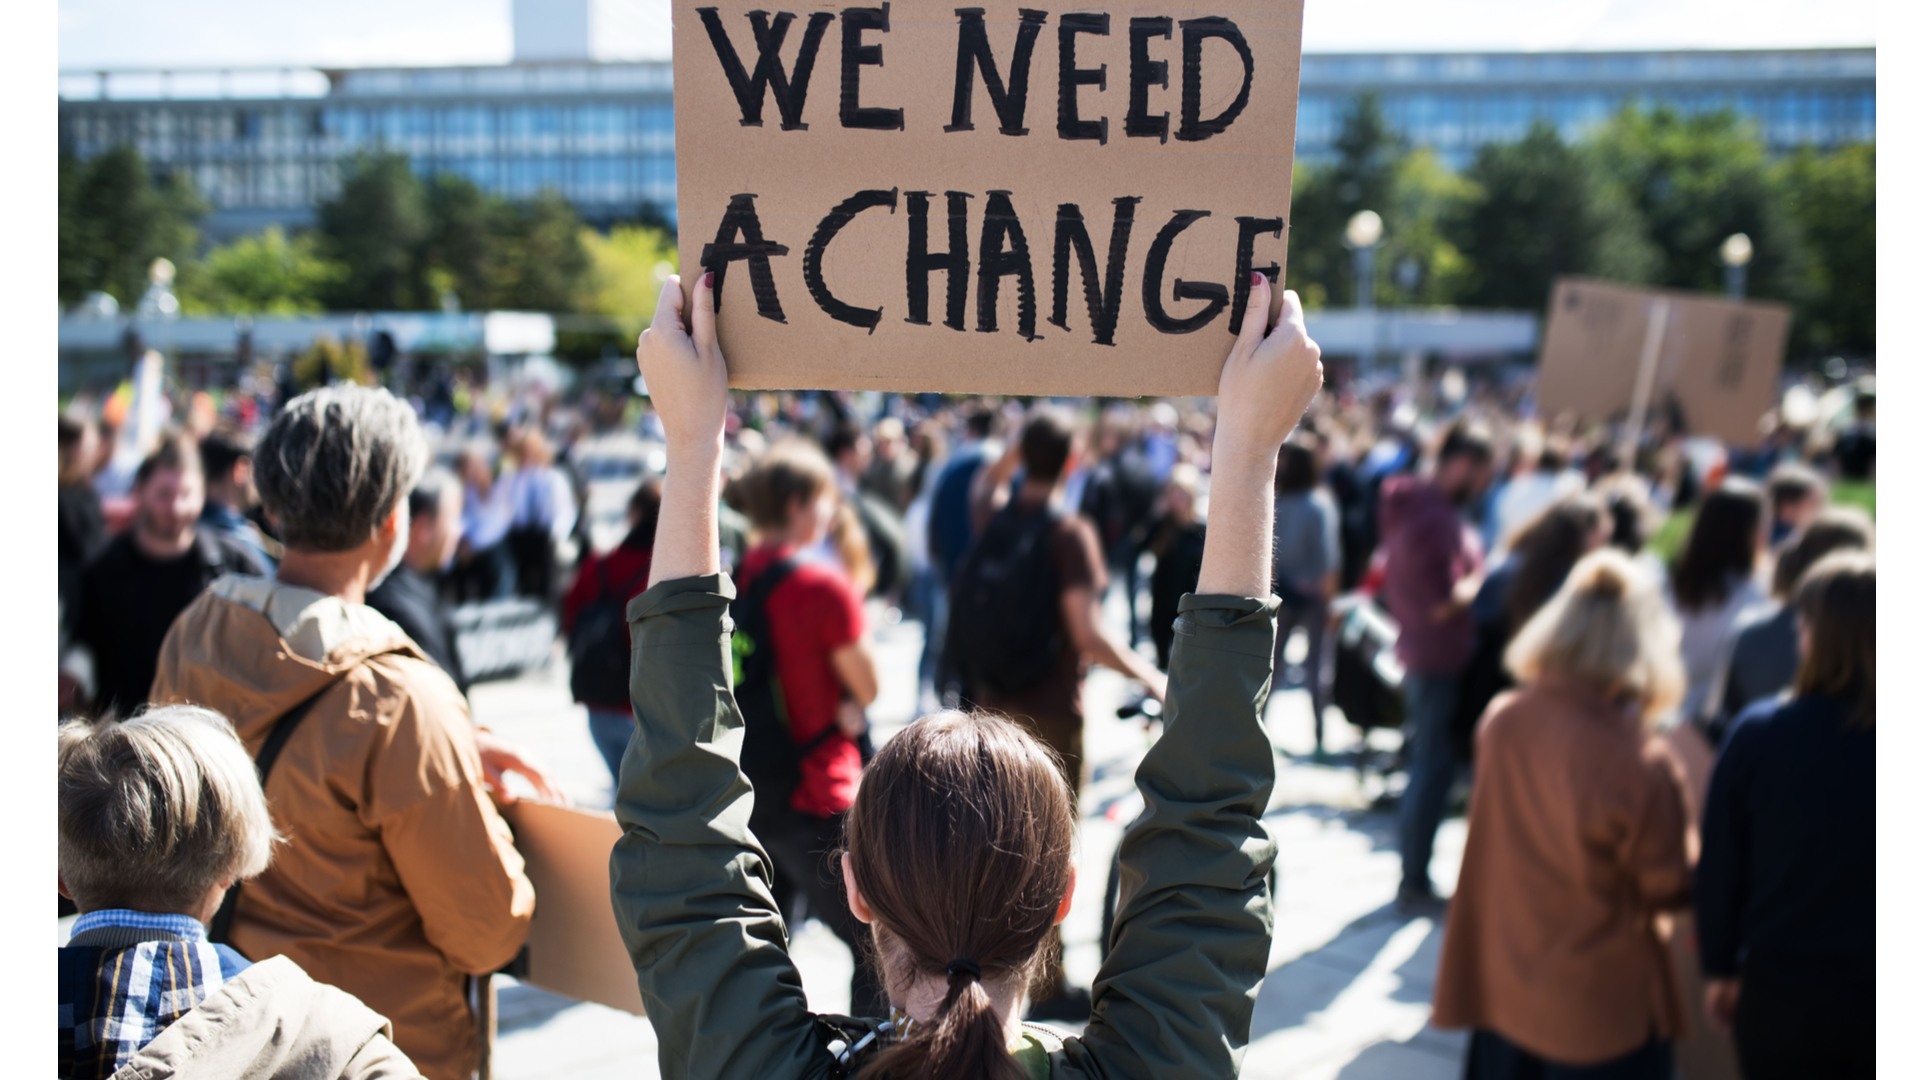 Girl holding a We need Change sign in theme with COP26 summit 